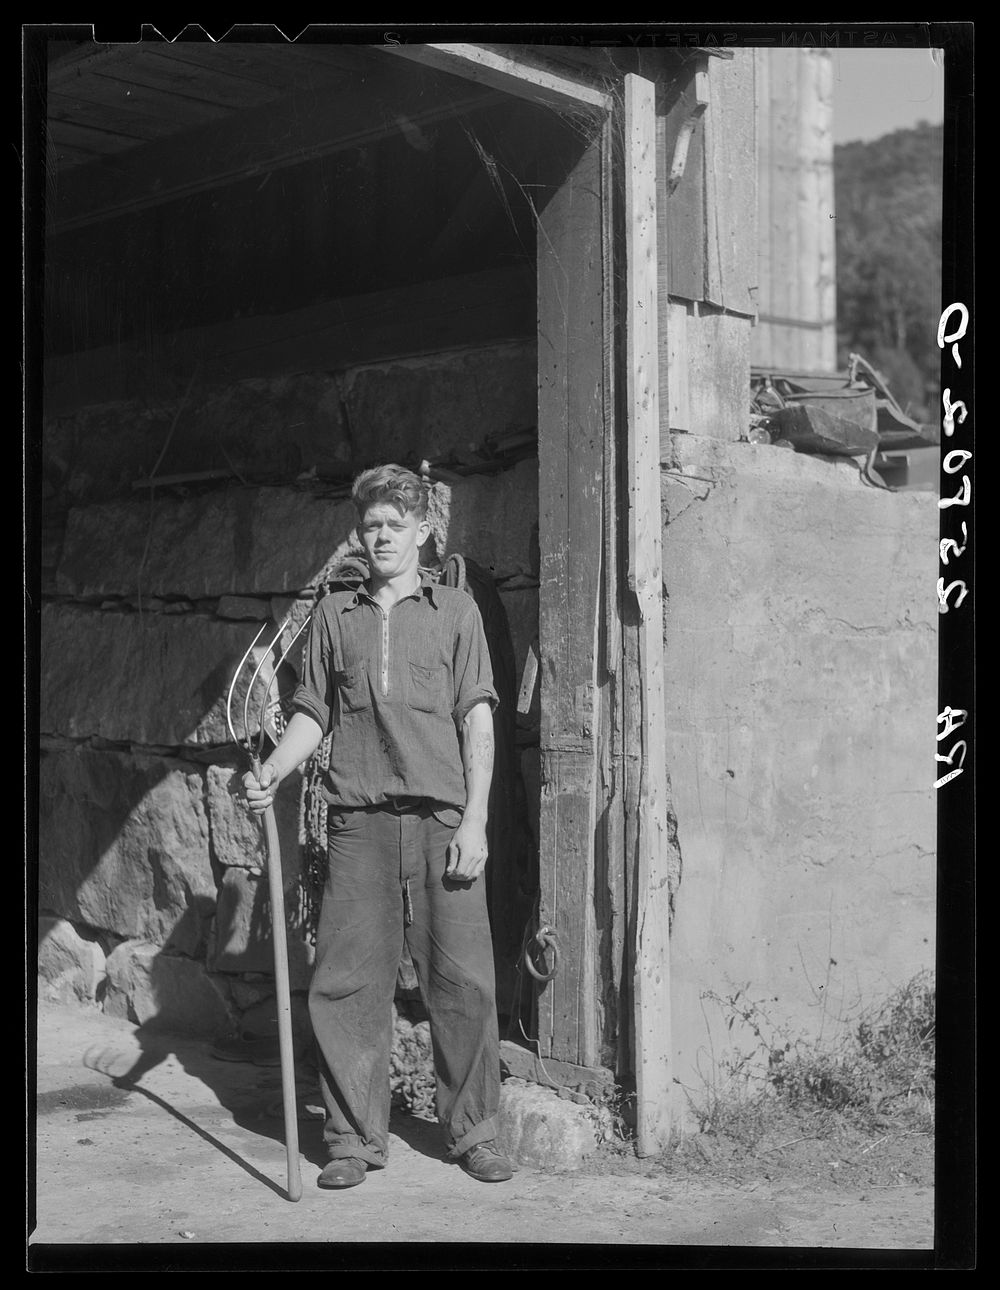 Hired hand. McNally farm, Kirby, Vermont. Sourced from the Library of Congress.